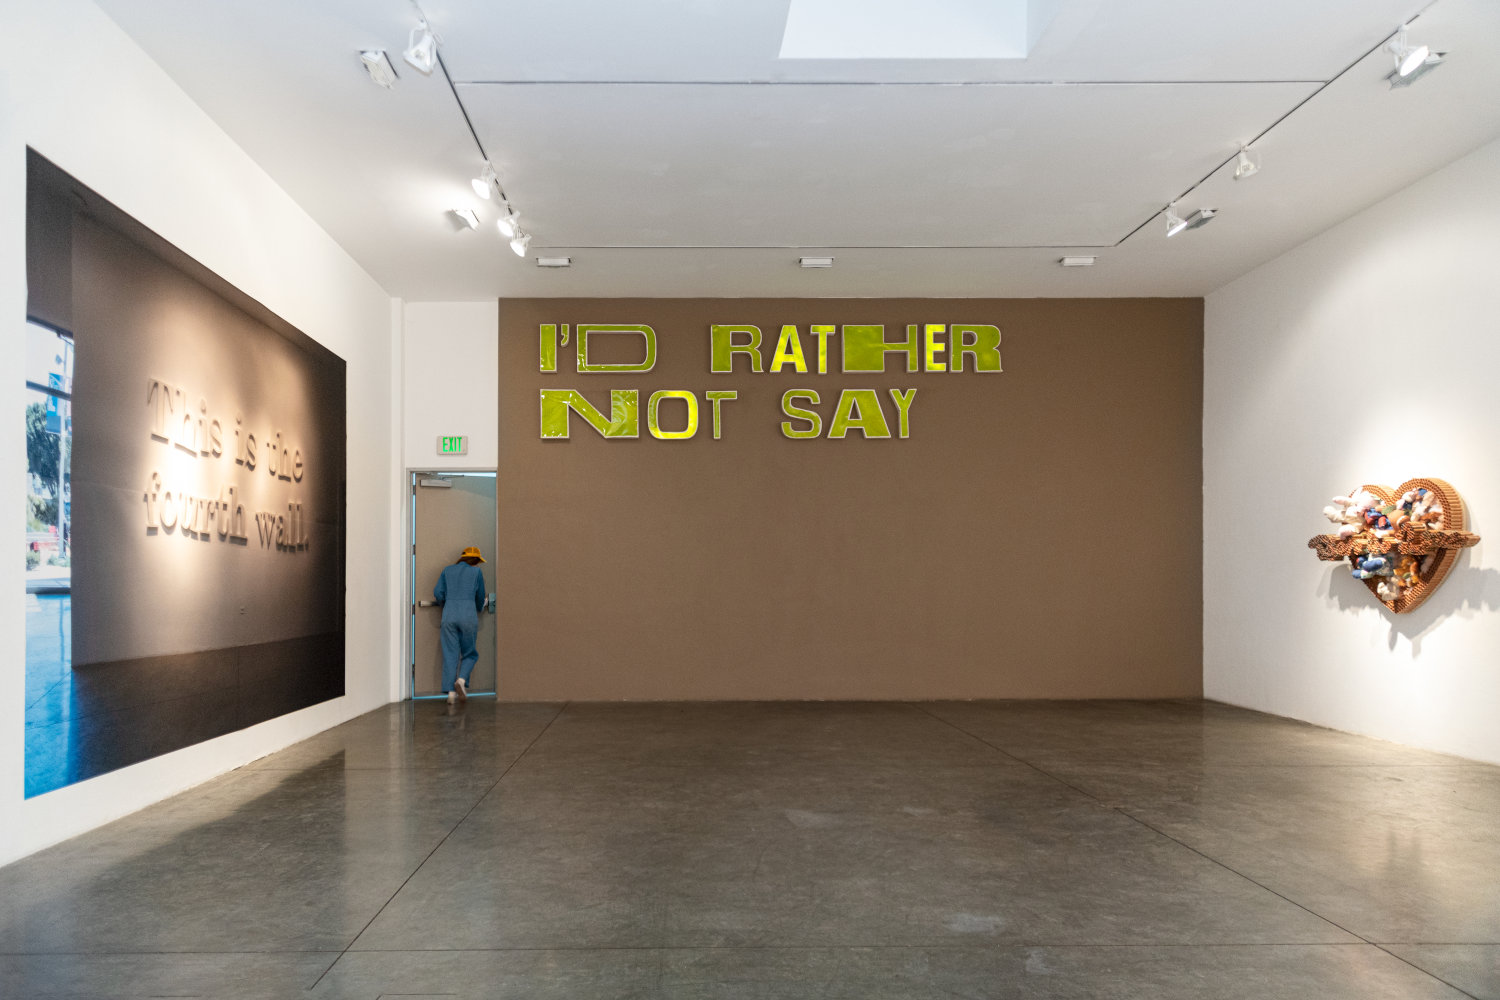 Sayer Delk artwork of letters on a wall saying "I'd rather not say" plus other artwork